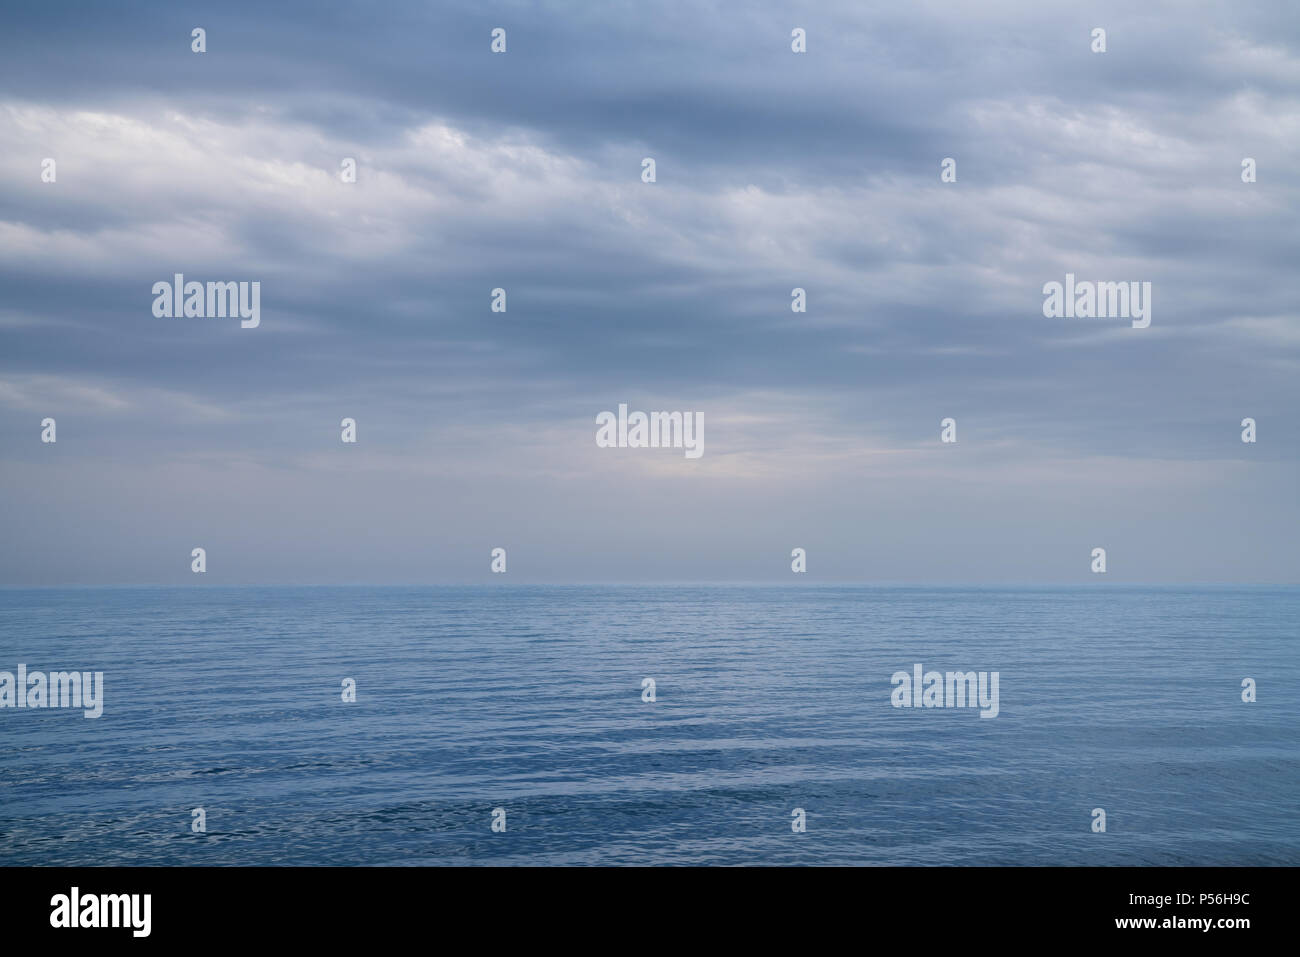 Beautiful sea and clouds sky.Seascape with grey clouds. Stock Photo